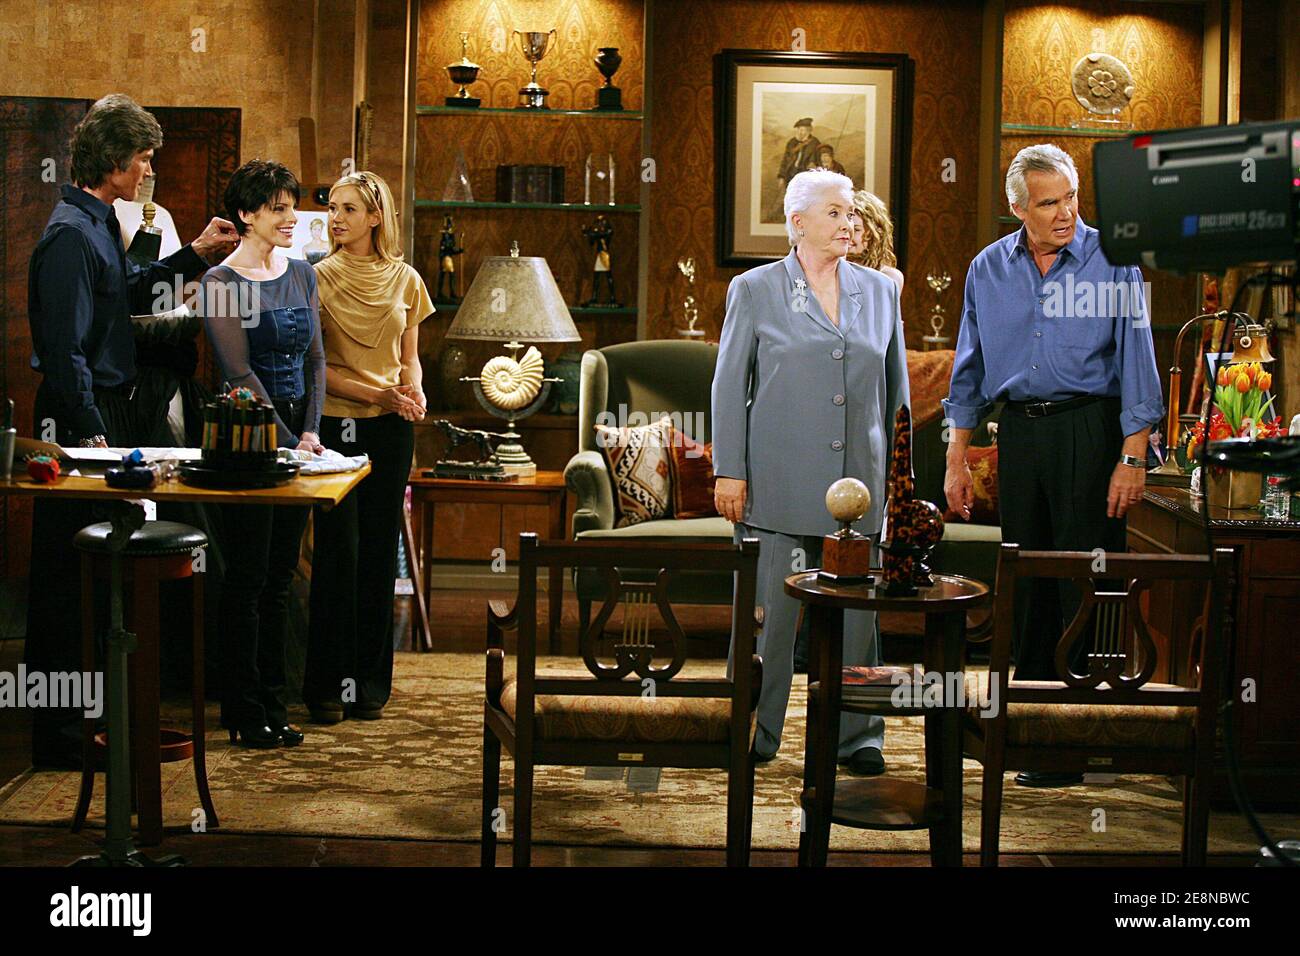 EXCLUSIVE. BEHIND THE SCENES : Ronn Moss, Lesli Kay, Ashley Jones, Mackenzie Mauzy, Susan Flannery and John McCook on the set of 'The Bold and the Beautiful' (Amour, gloire et beaute) on CBS studios, In Los Angeles, CA, USA, on January 10, 2007. Photo by Denis Guignebourg/ABACAPRESS.COM Stock Photo